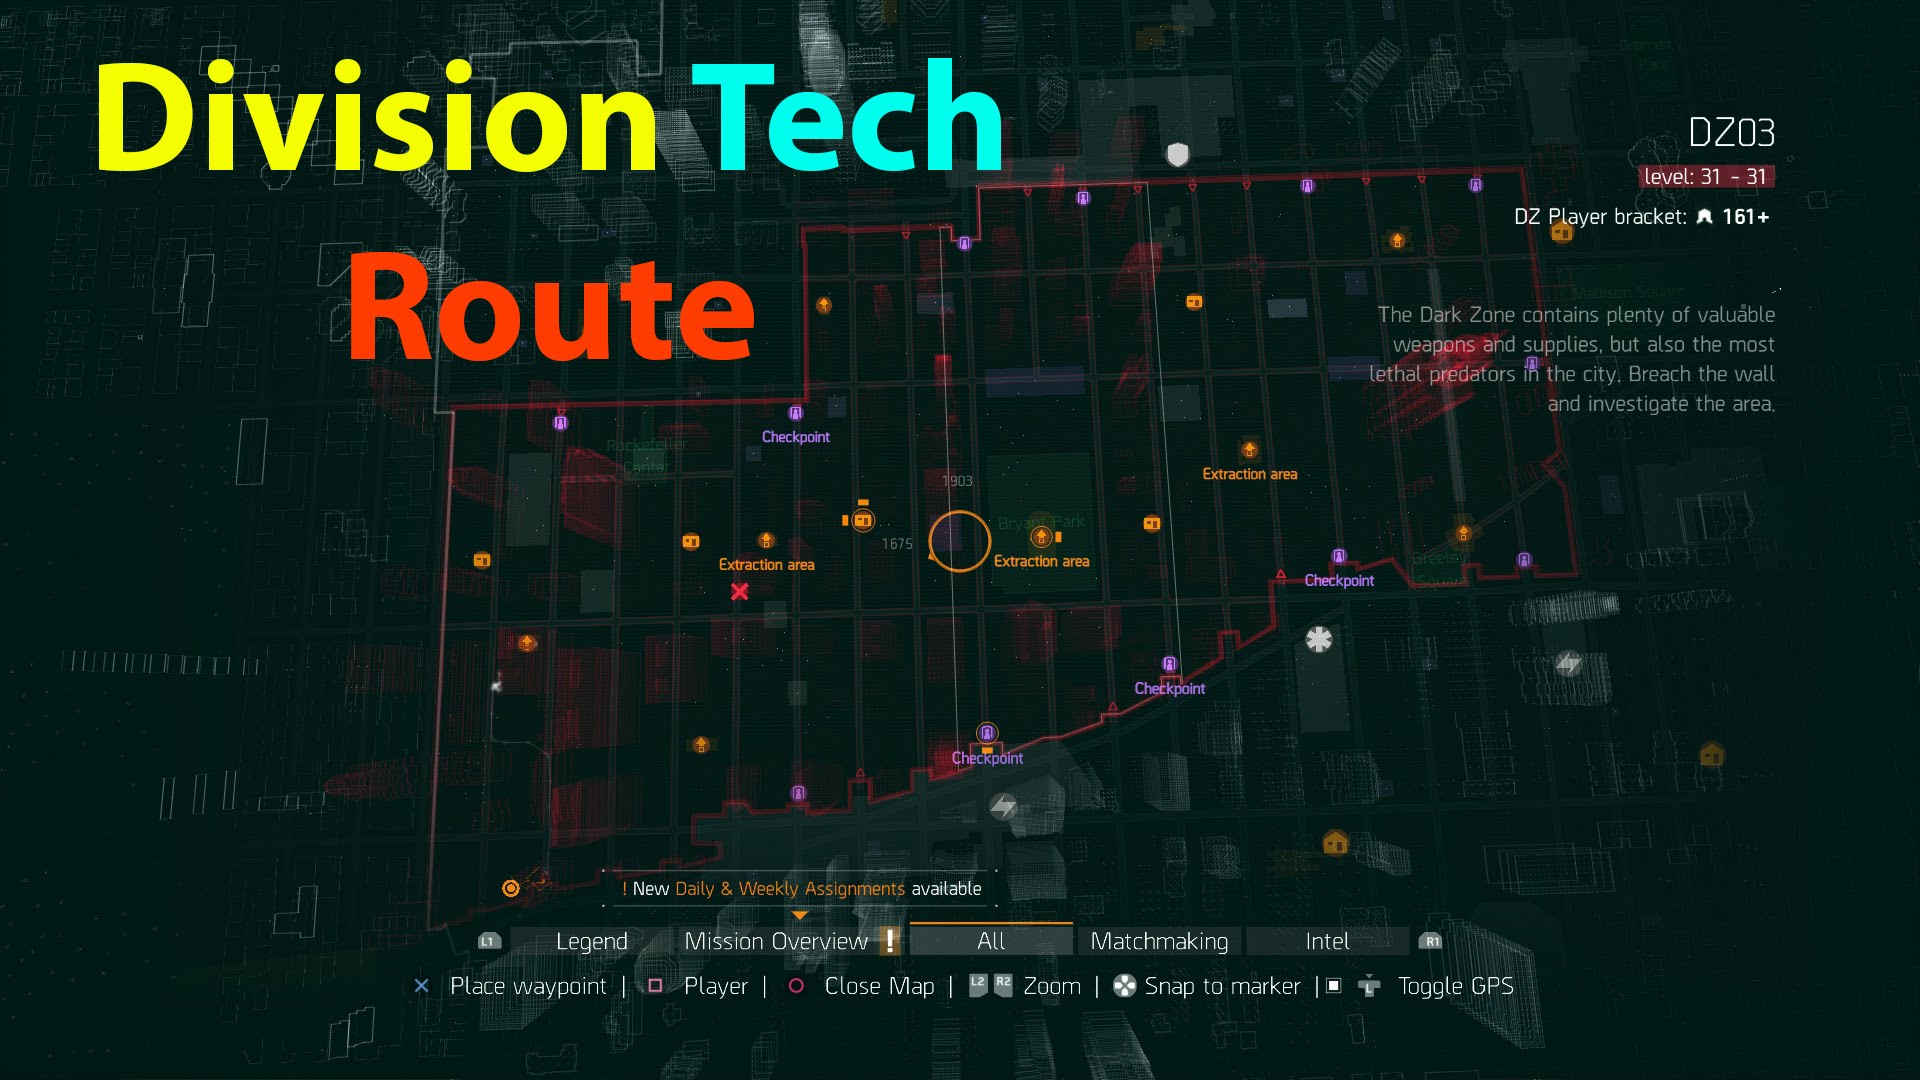 Tom Clancy's The Division DZ My Best Division Tech Farm Route - YouTube